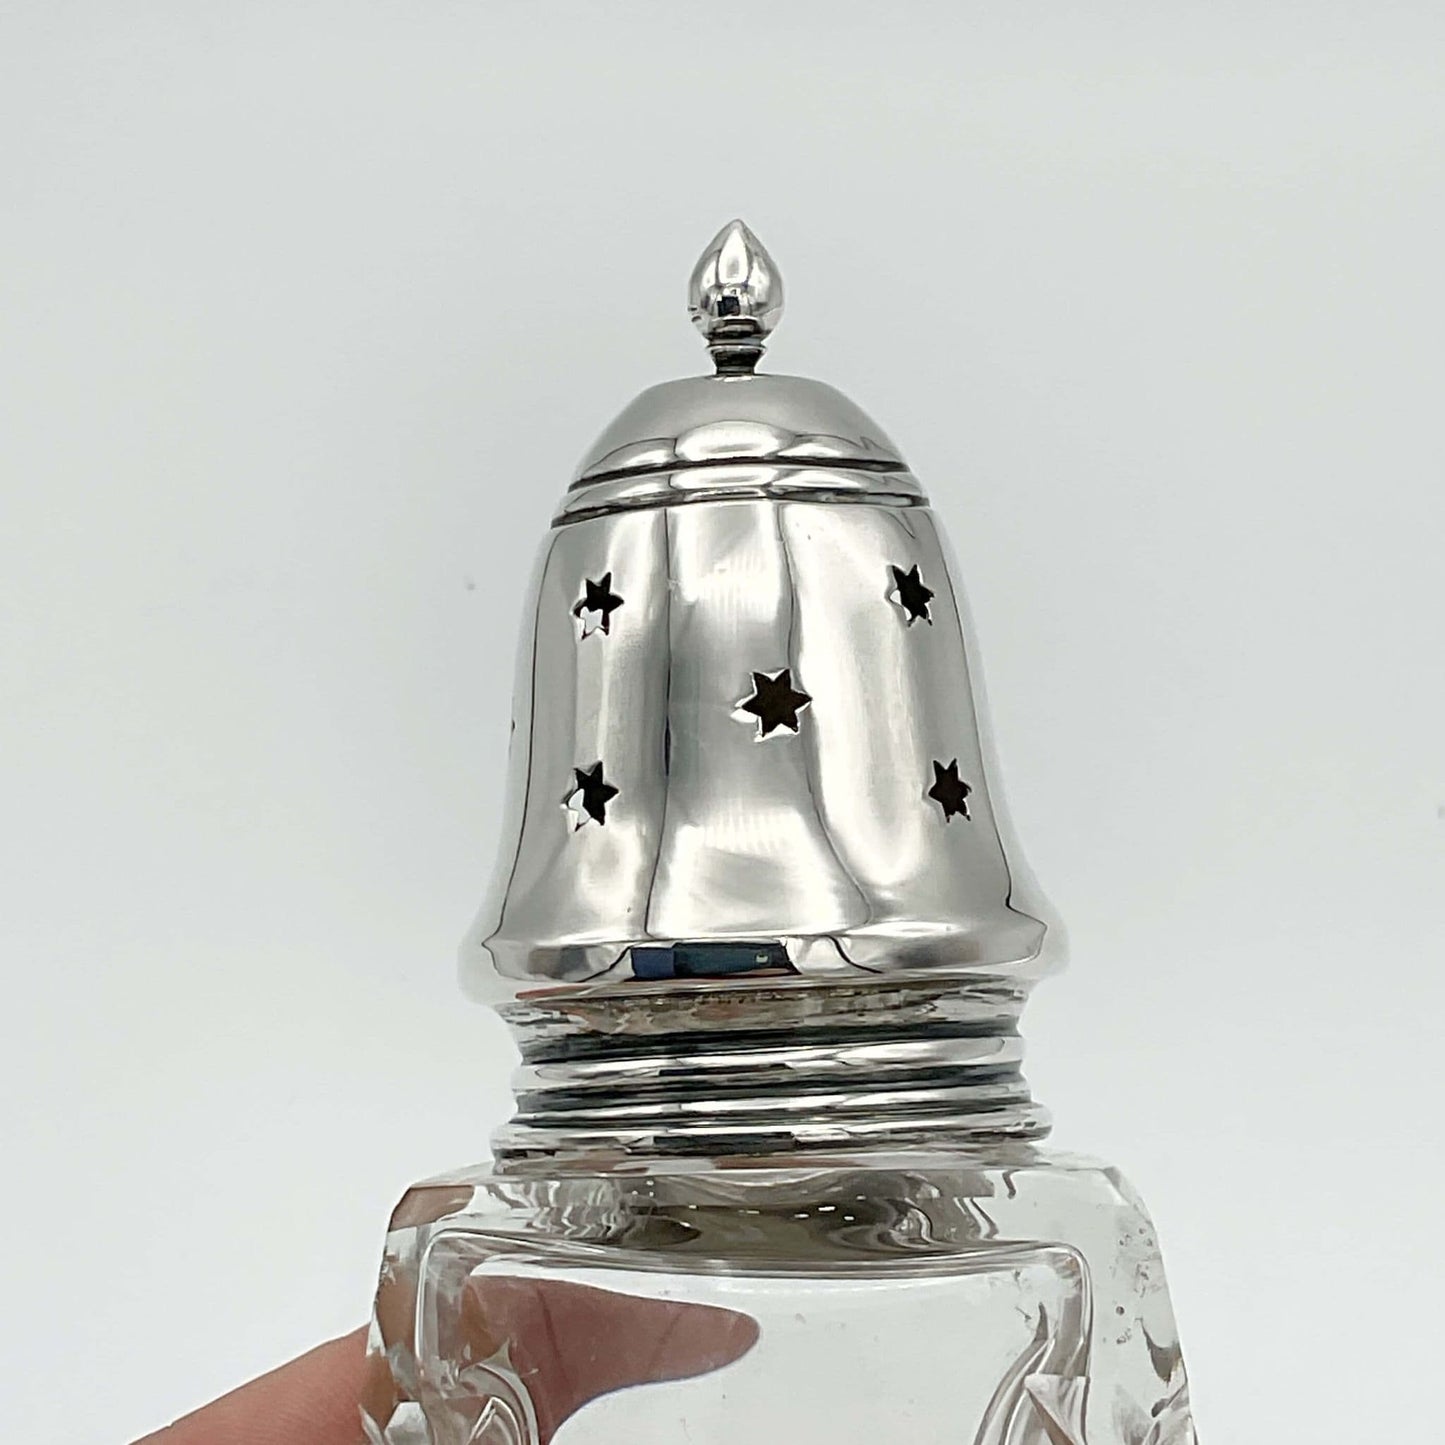 Sterling silver topped sugar caster with a star design